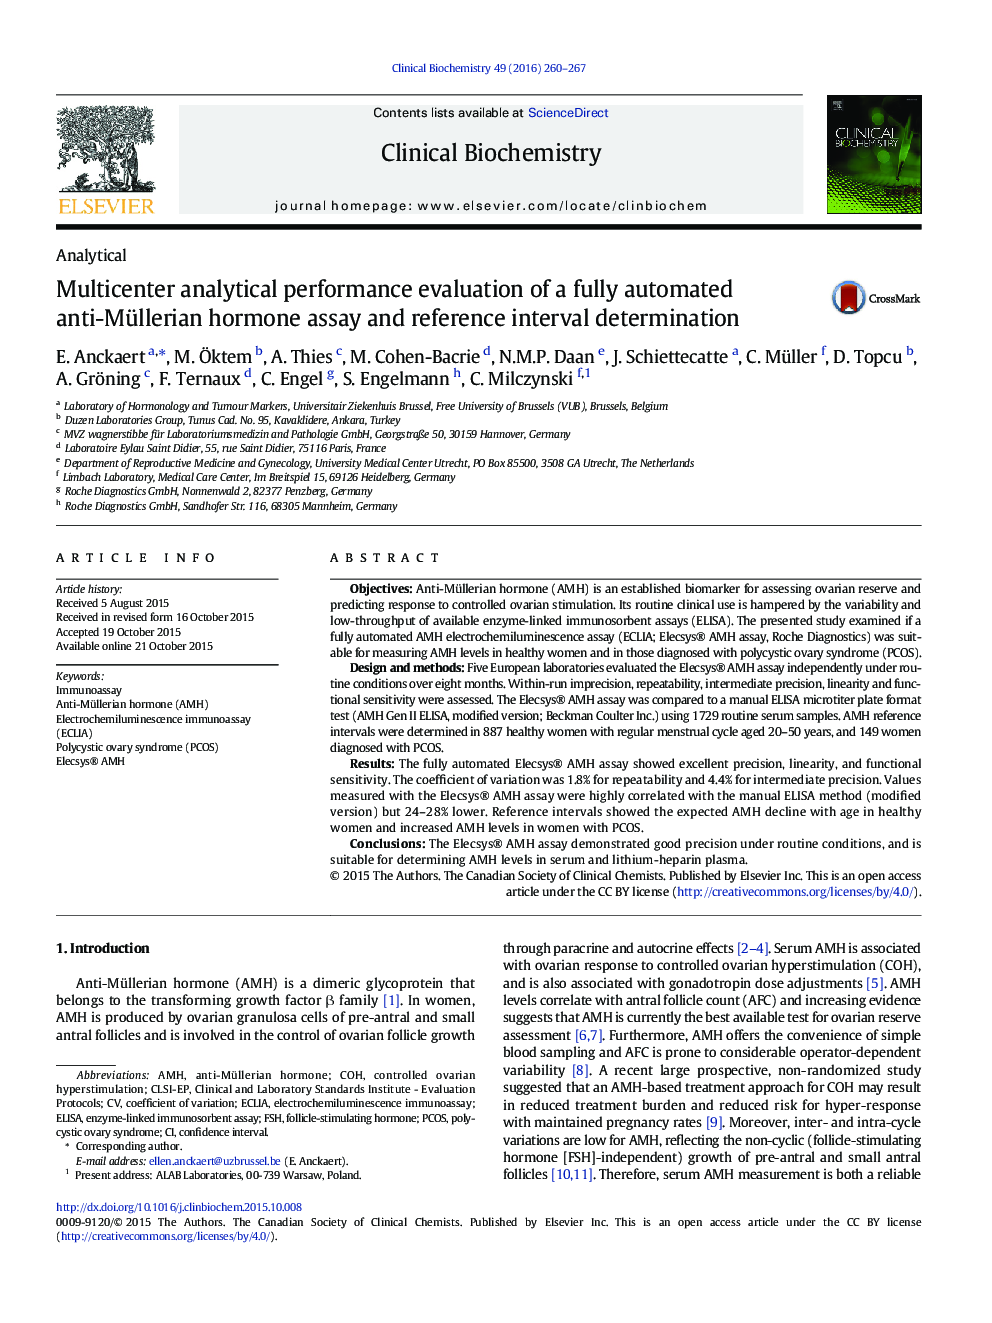 Multicenter analytical performance evaluation of a fully automated anti-Müllerian hormone assay and reference interval determination